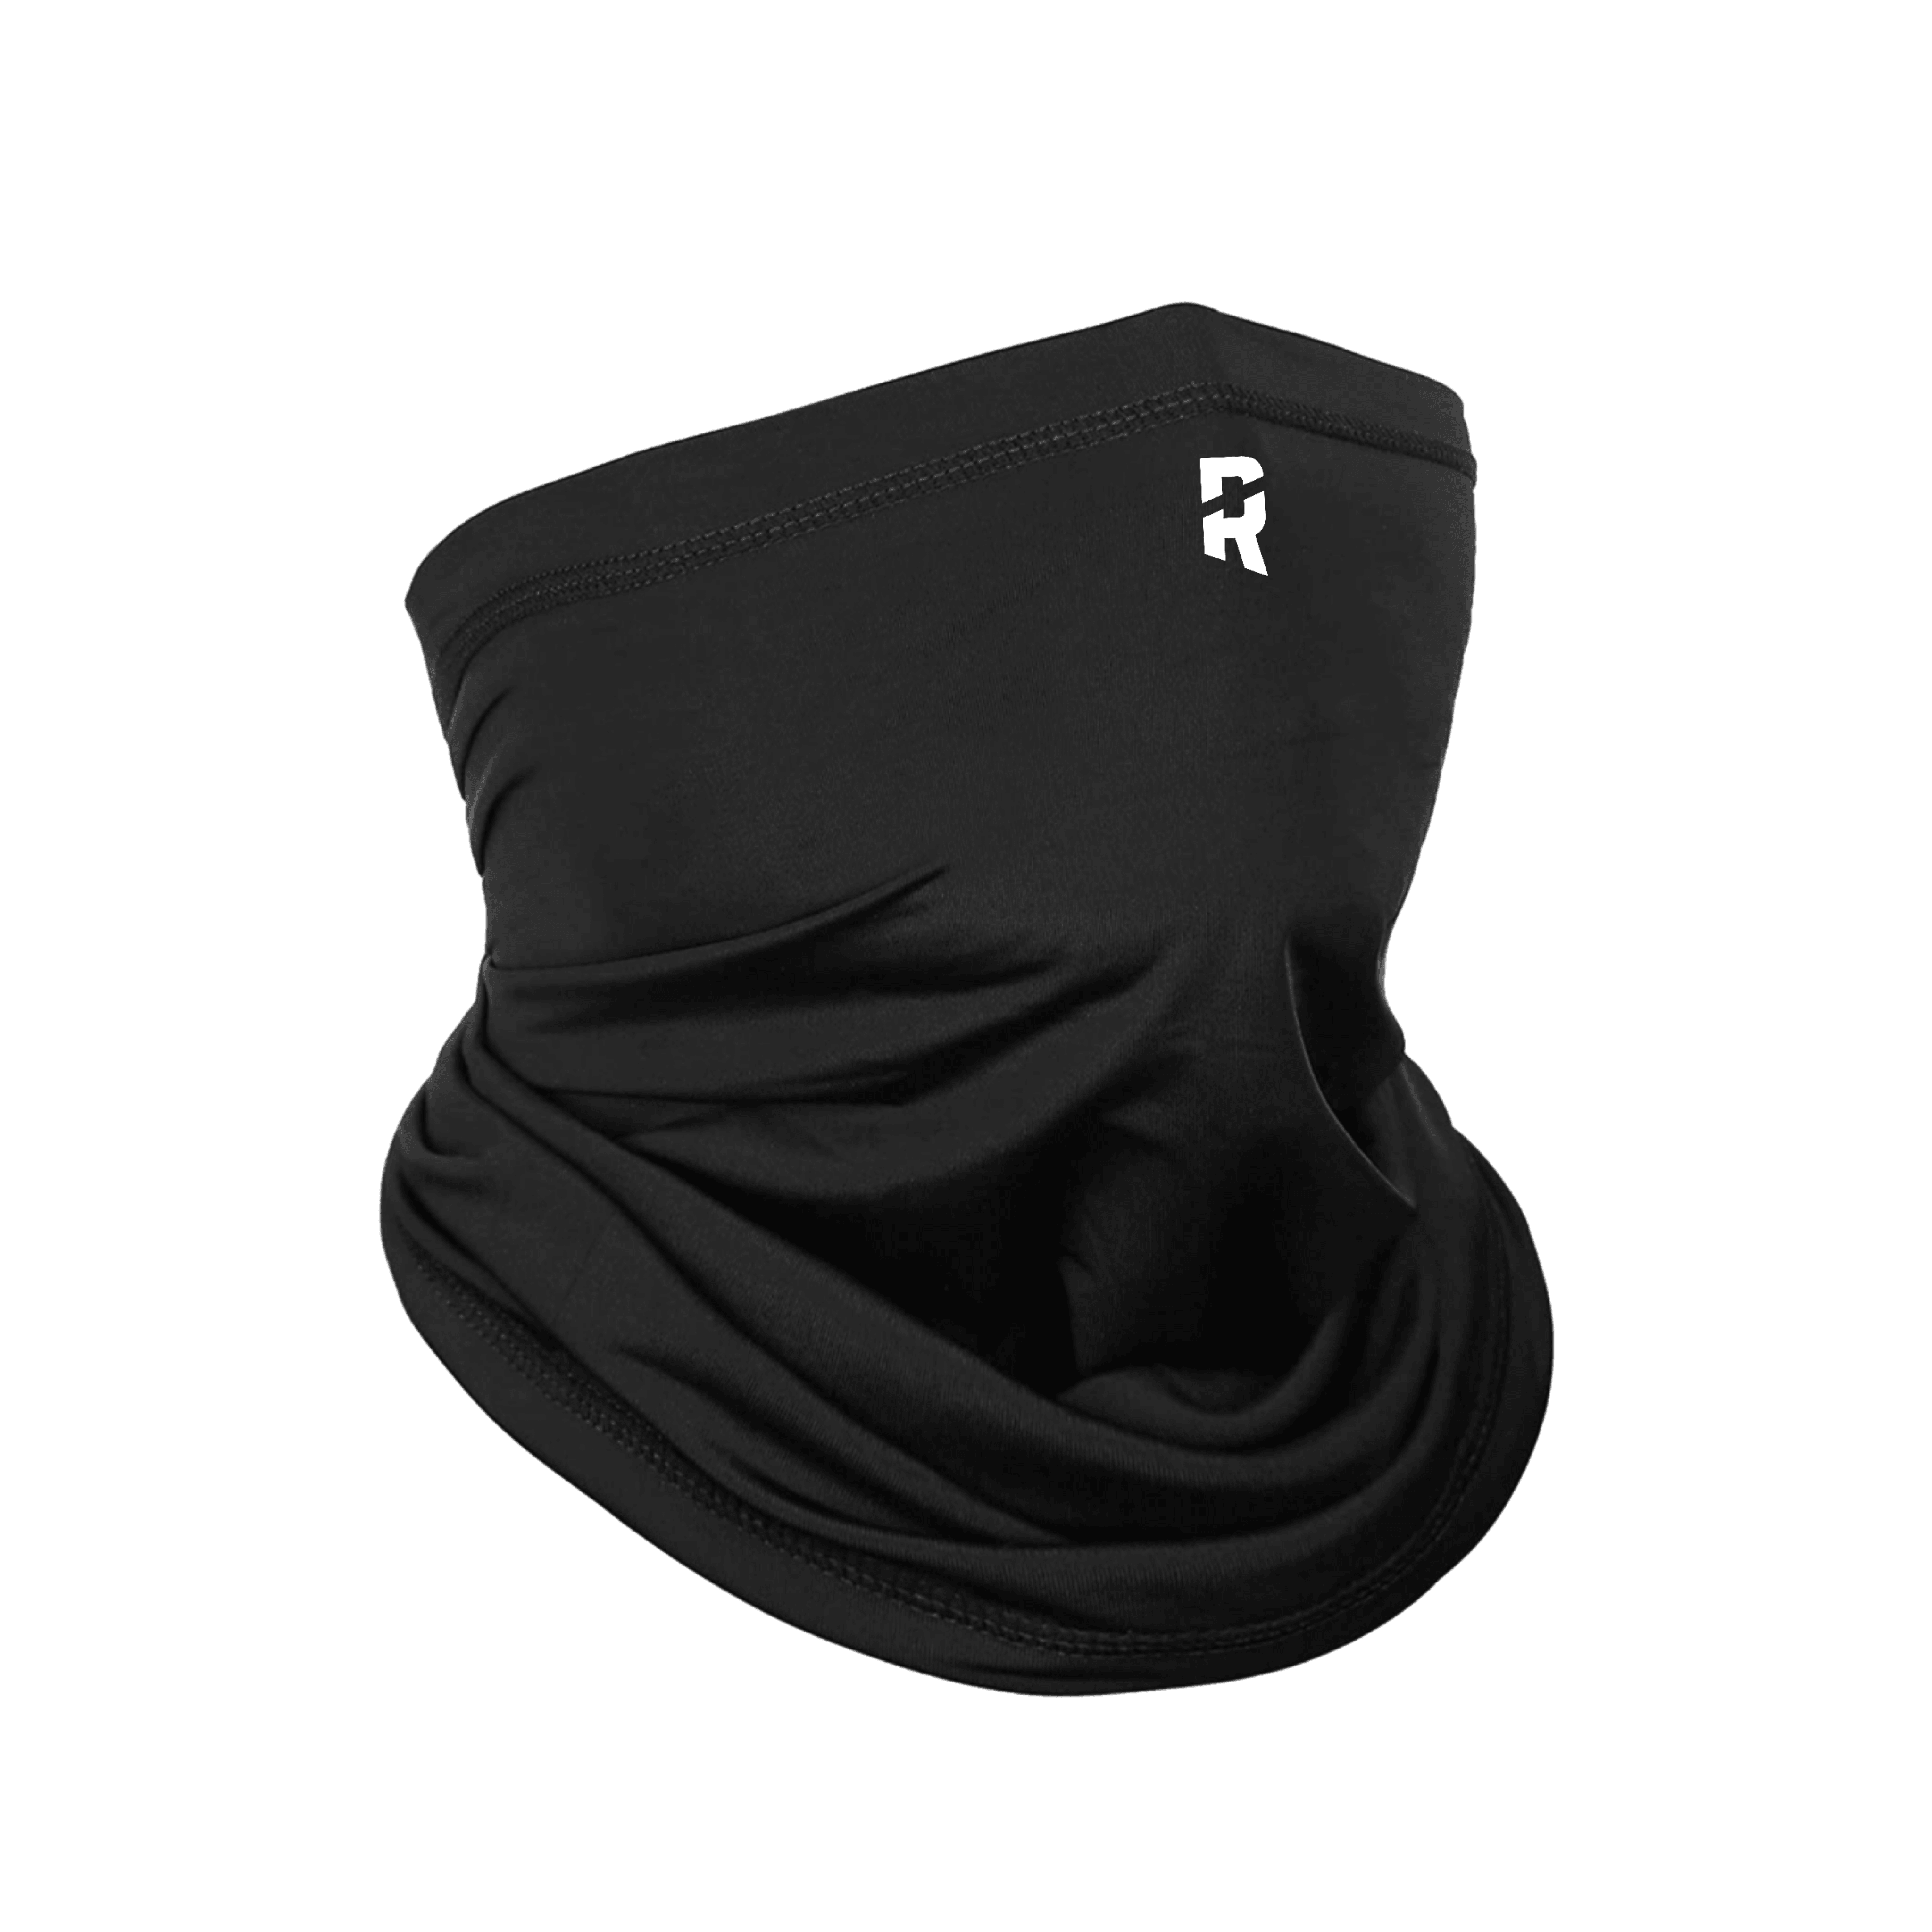 NECK COVERS – Refend